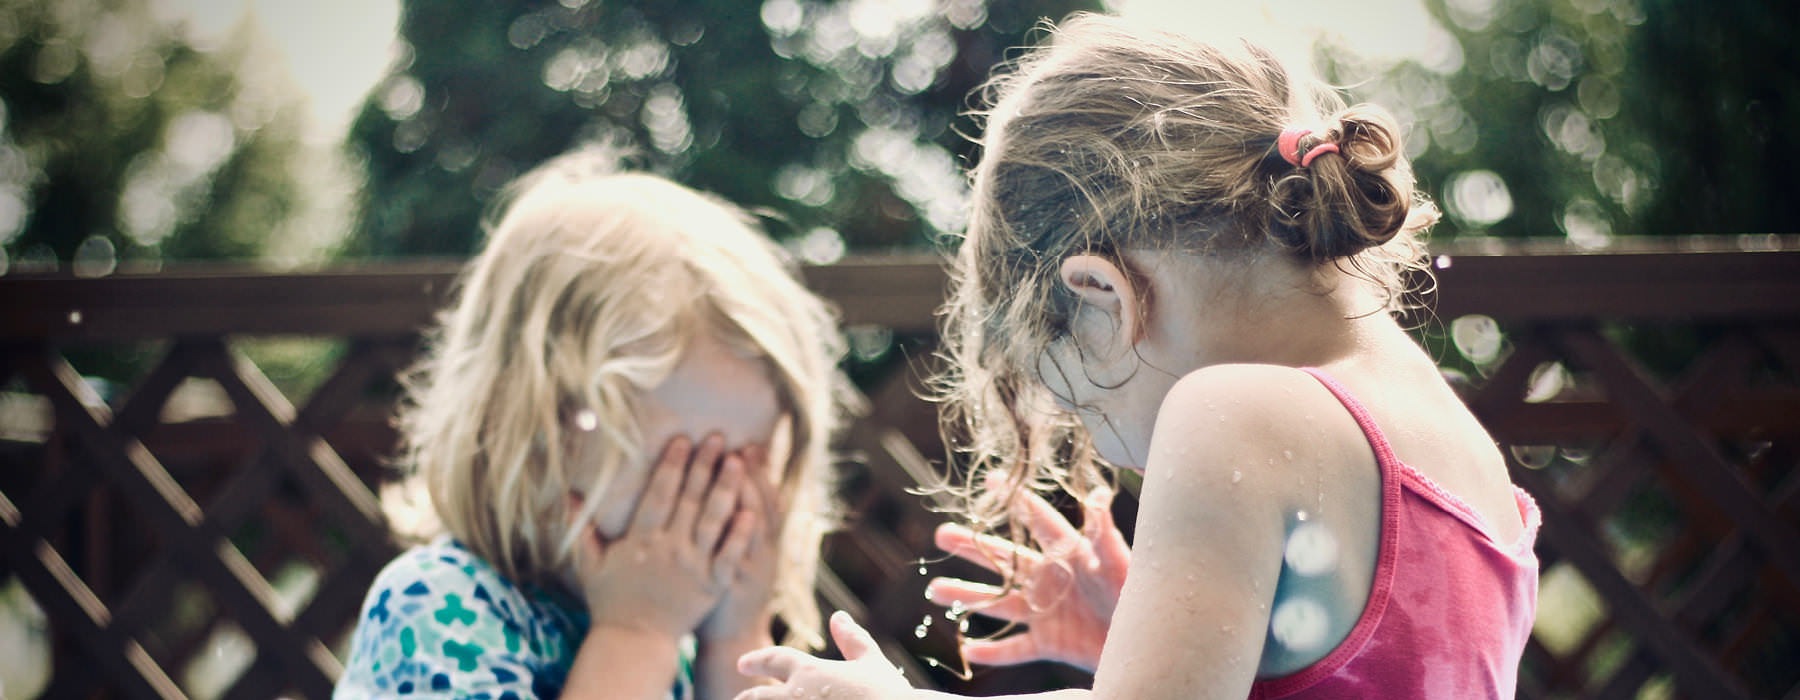 two little girls hide their faces as they play outside